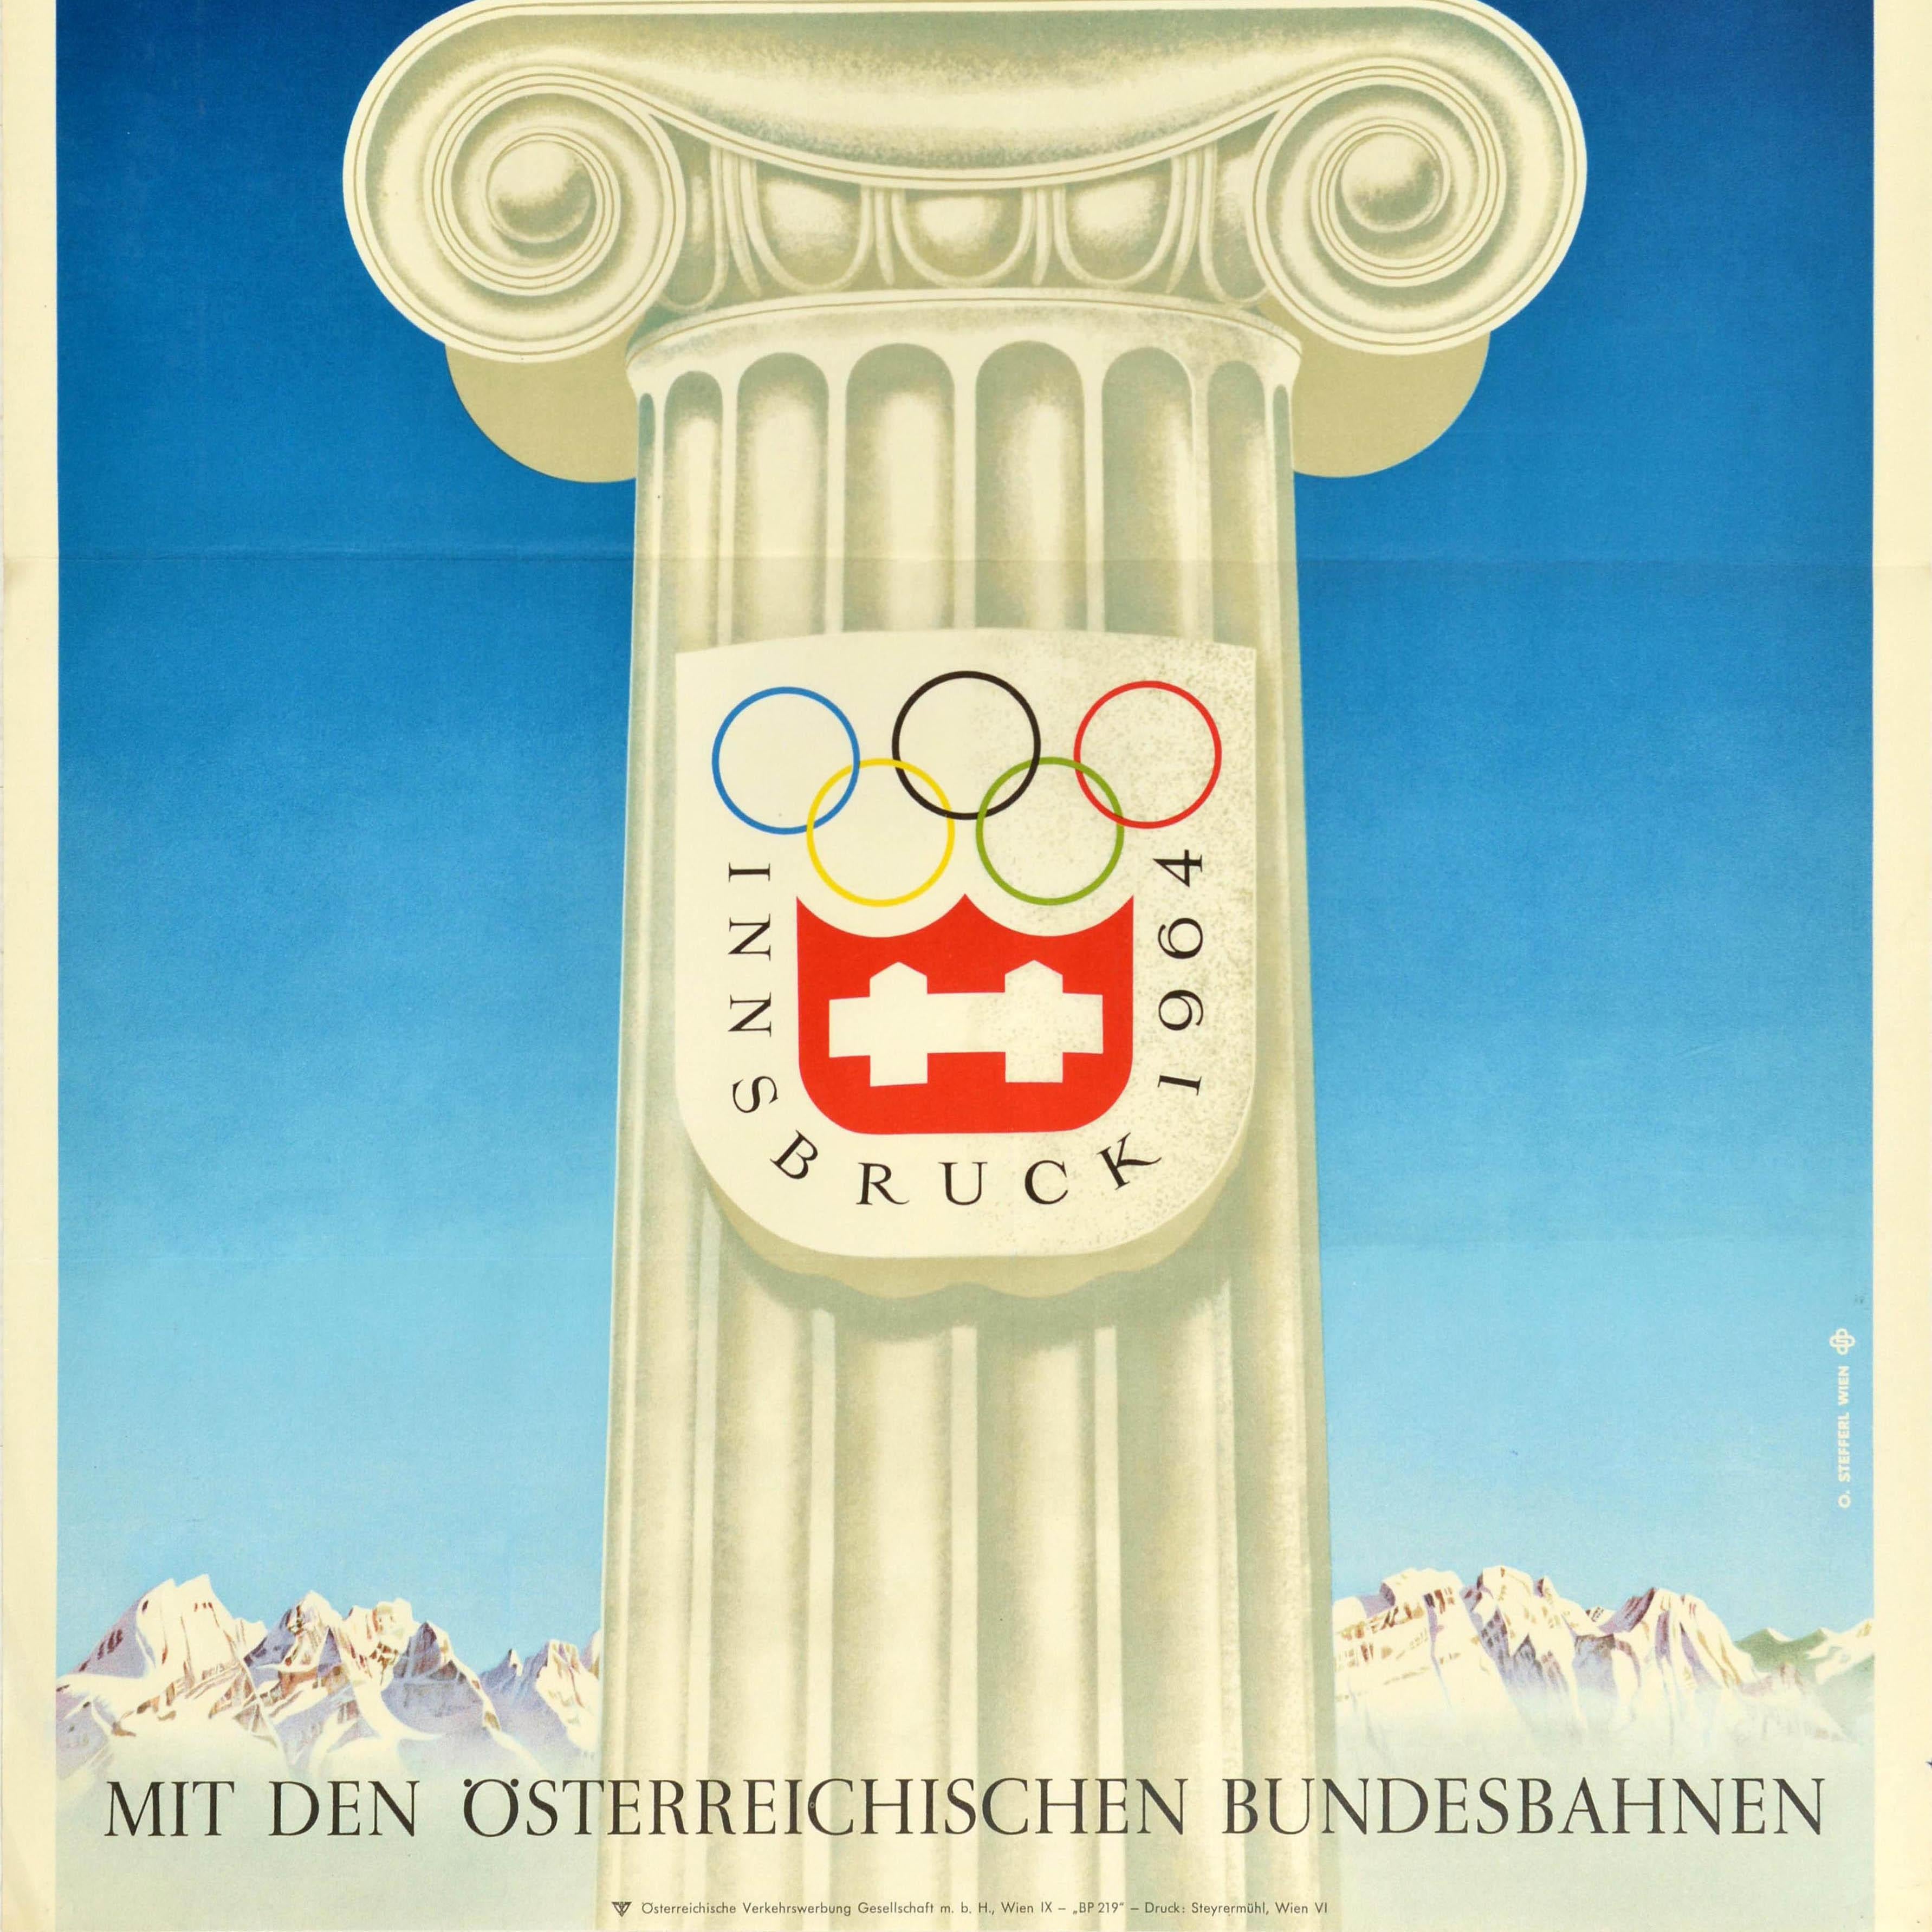 Original vintage sport poster - To the Winter Olympics with Austrian Railways / Zur Winter Olympiade Mit den Osterreichischen Bundesbahnen - featuring an image of the Innsbruck 1964 Winter Olympic Games logo on a column towering above snowy mountain